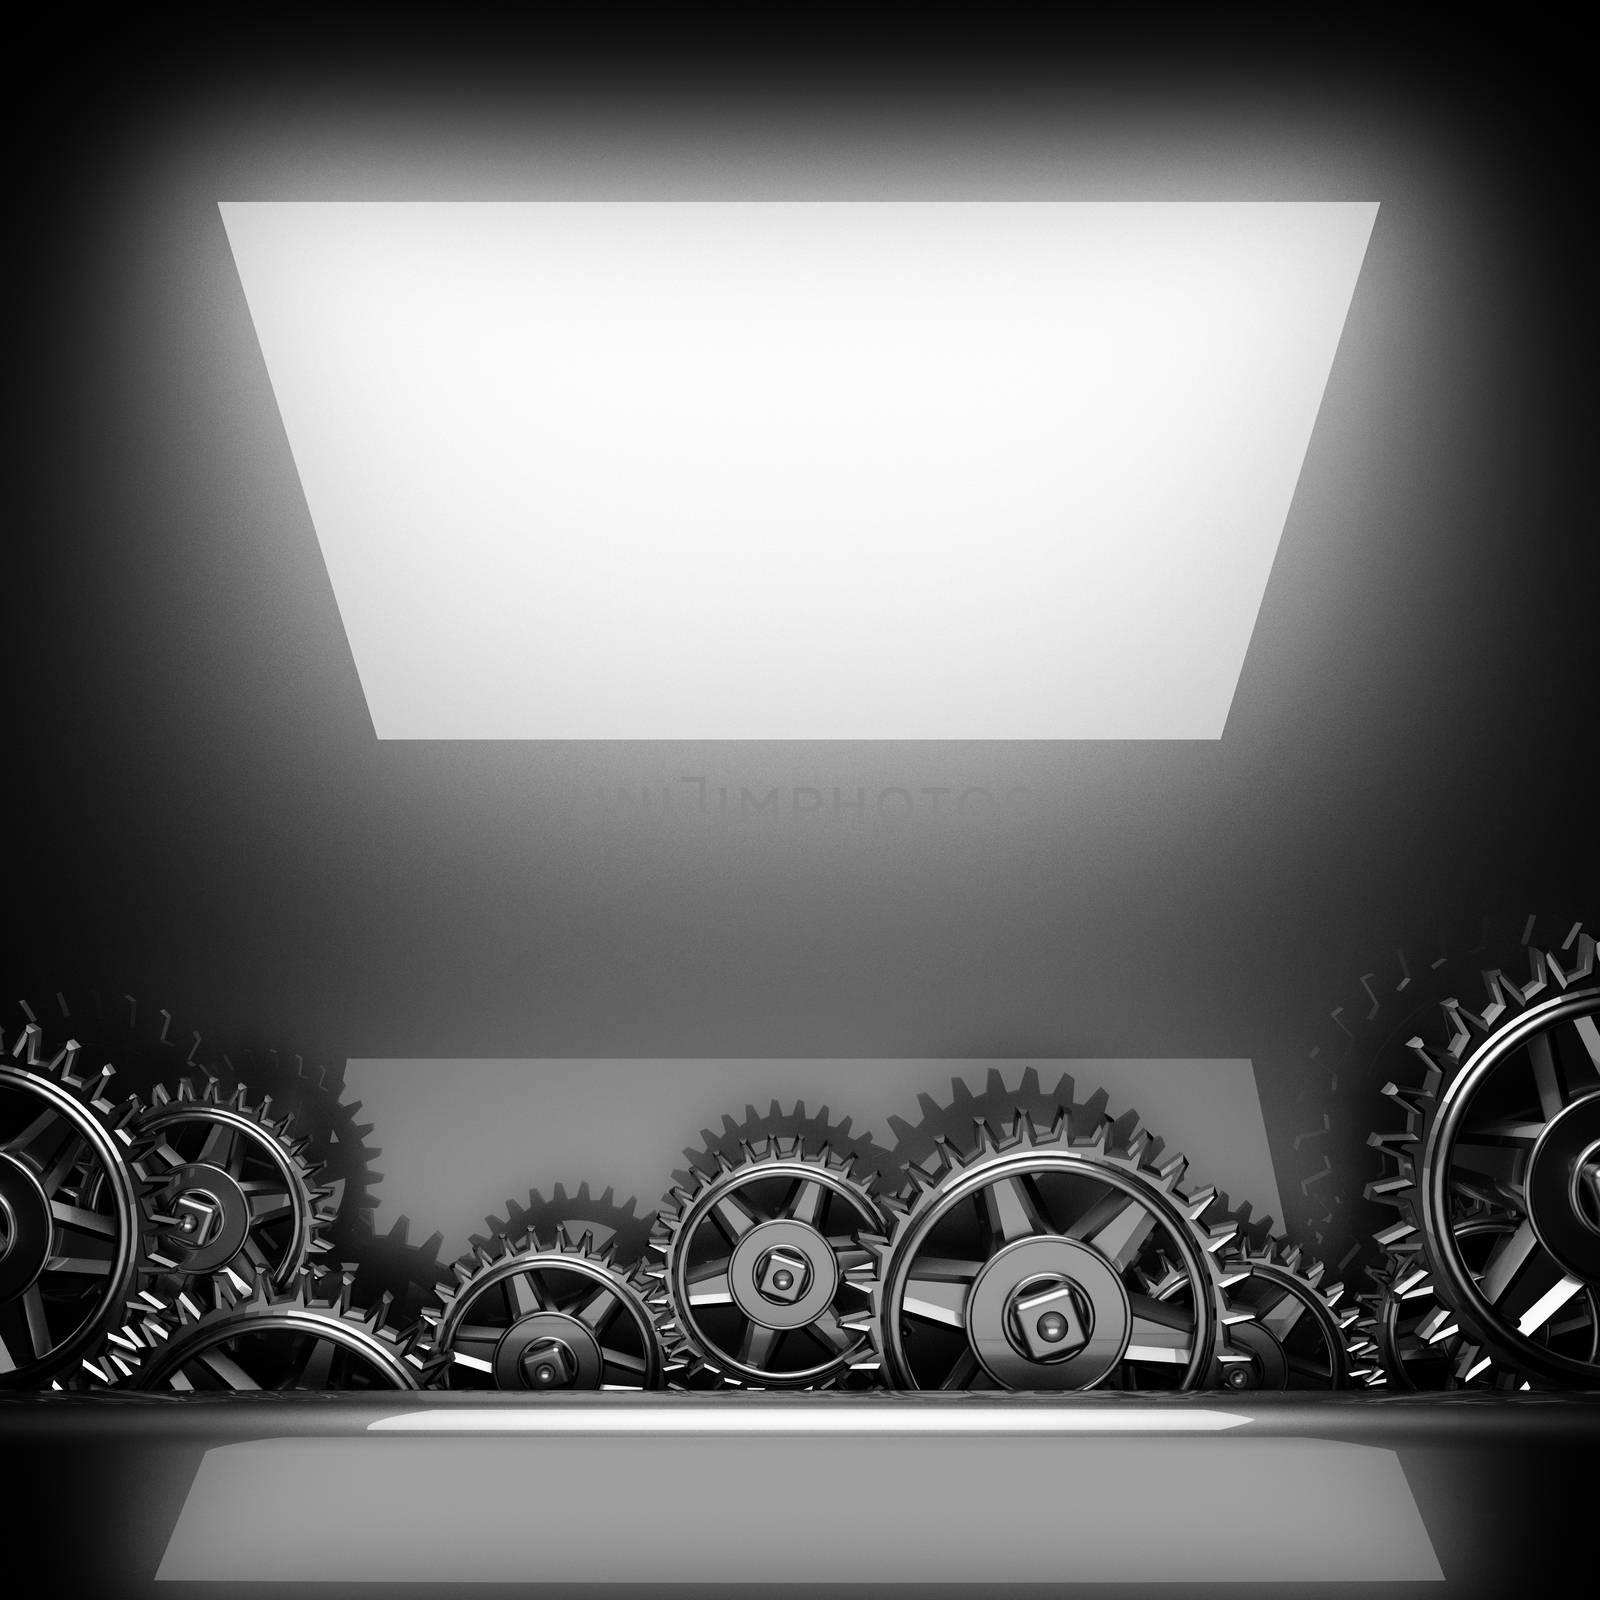 metal polished background with cogwheel gears by videodoctor